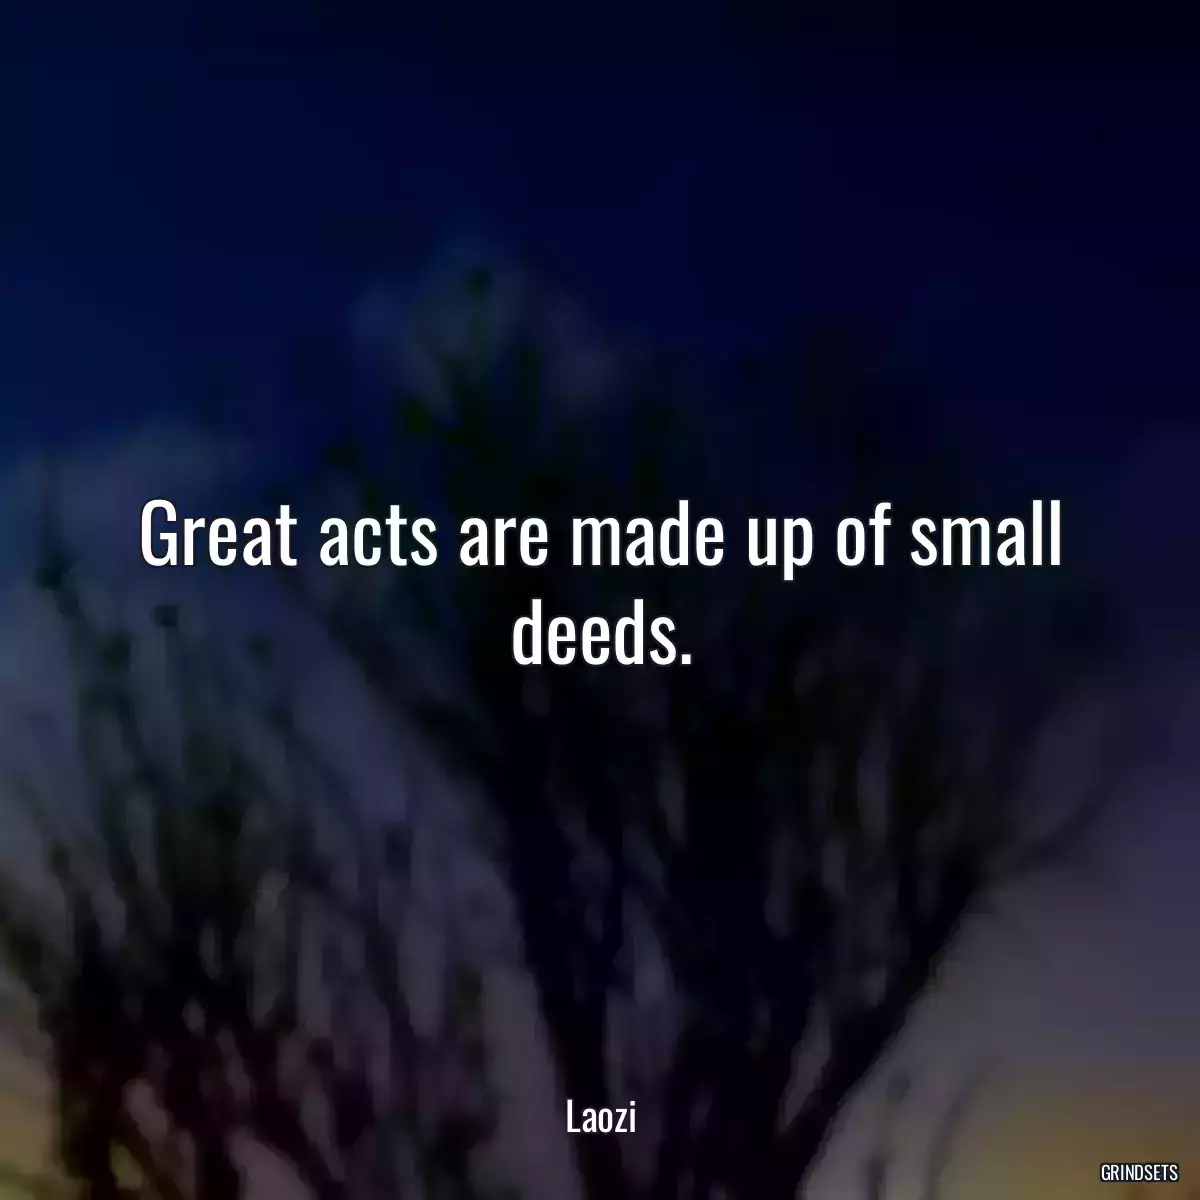 Great acts are made up of small deeds.